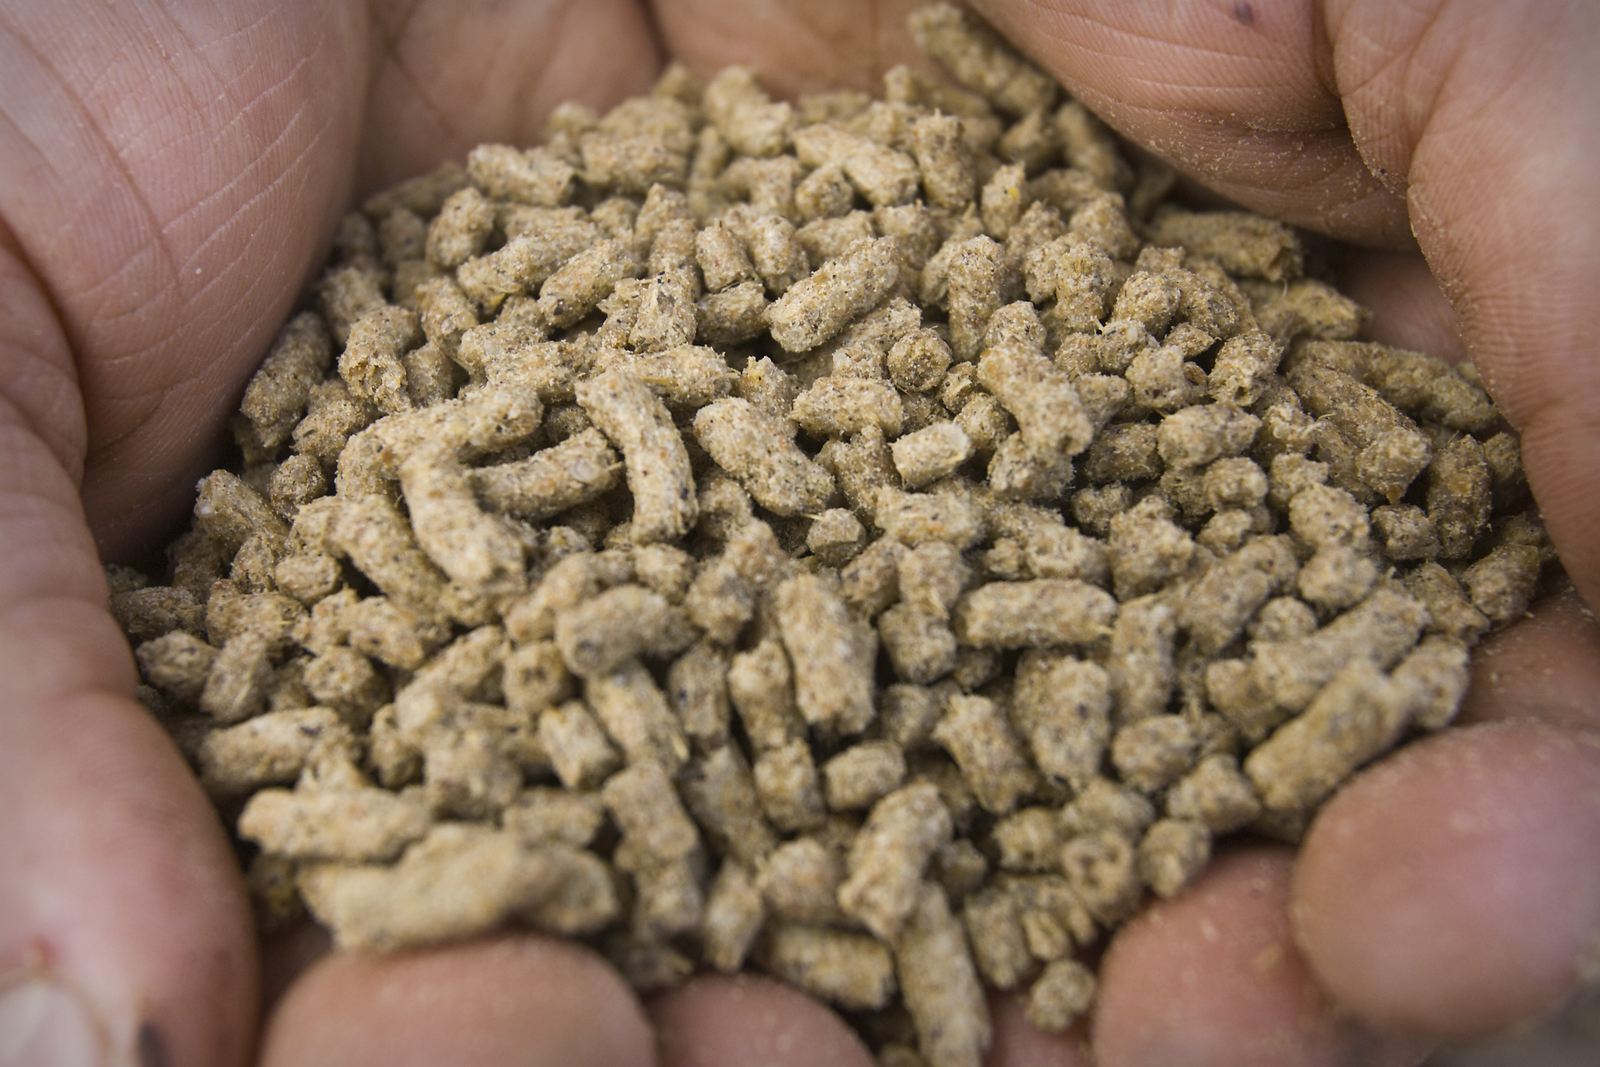 Study: Bacteria as an alternative to antibiotics in feed